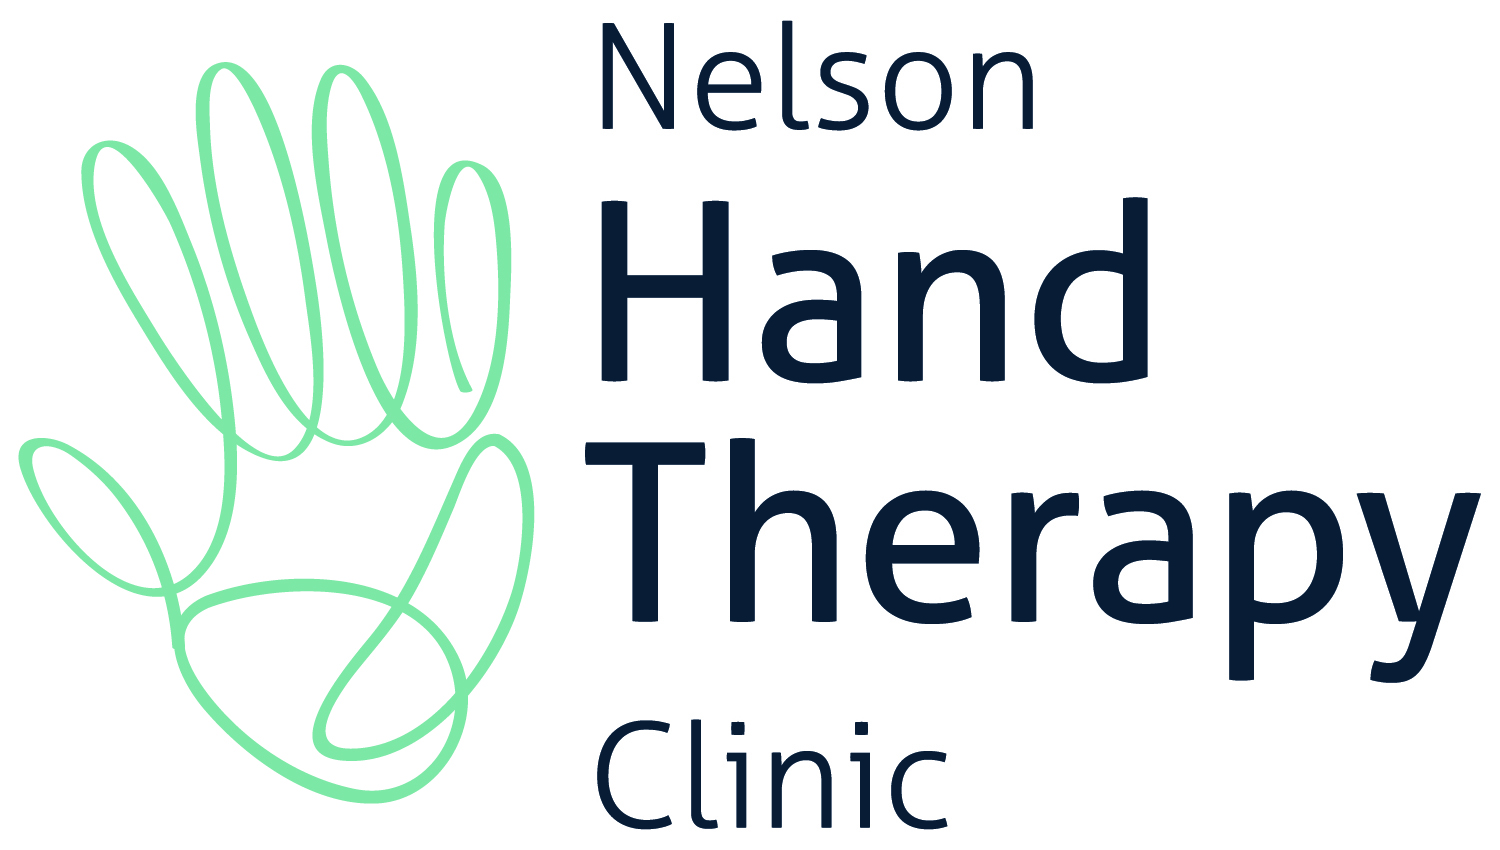 Nelson_hand_therapy_logo.jpg